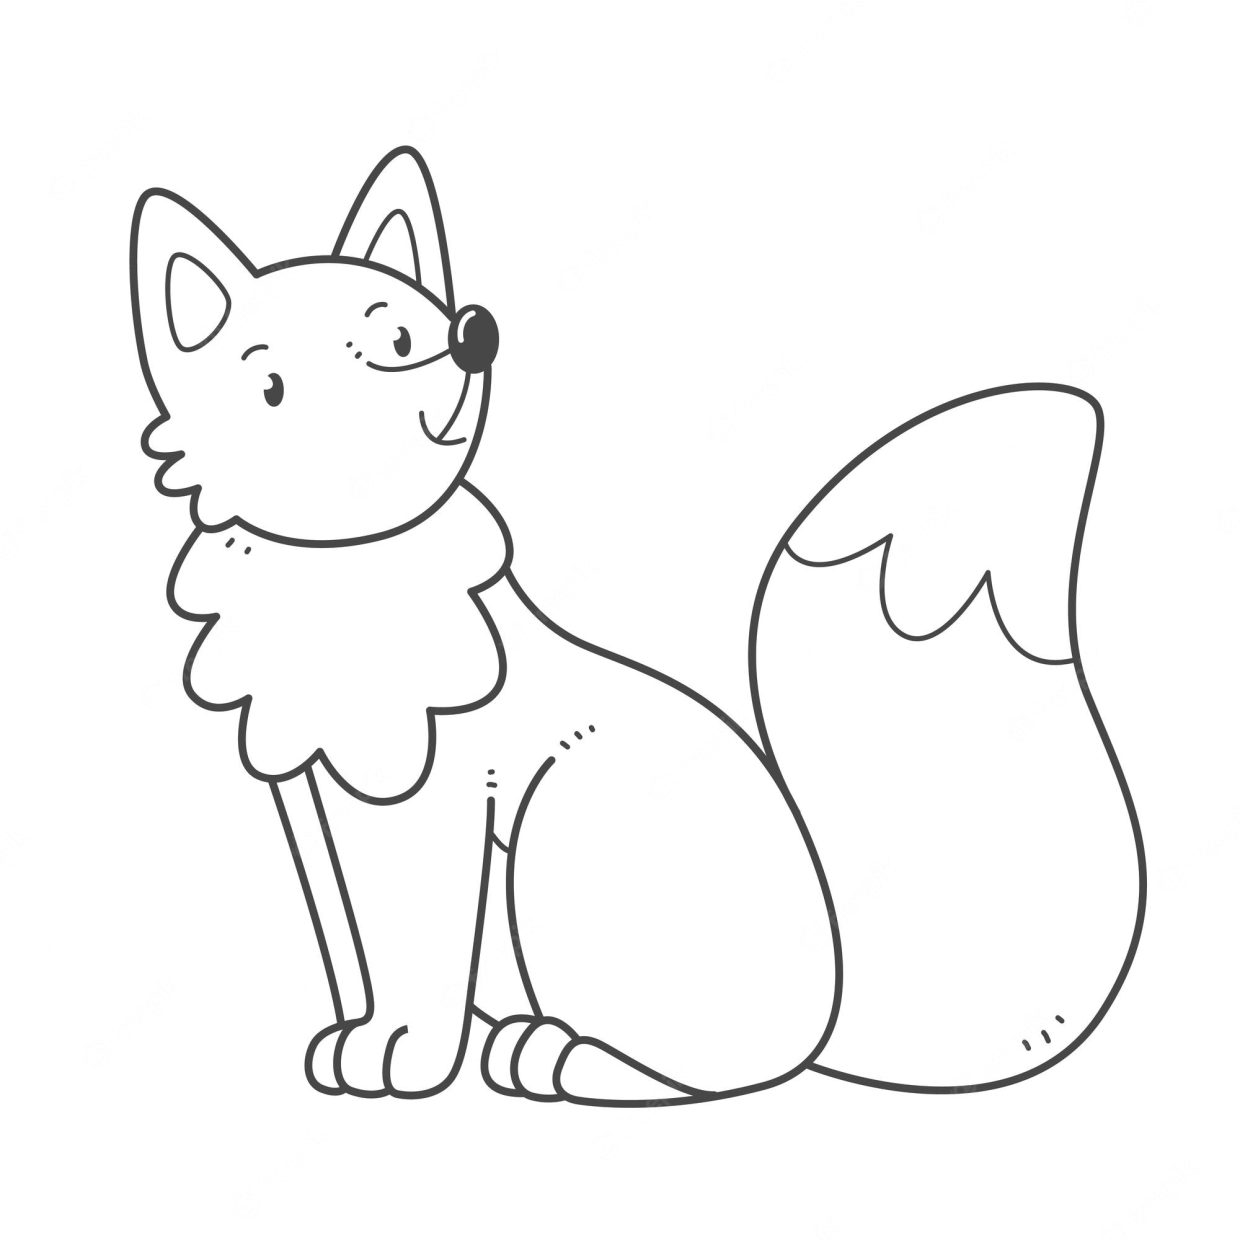 Cute Fox Coloring Pages - Free Printable Sheets for Kids